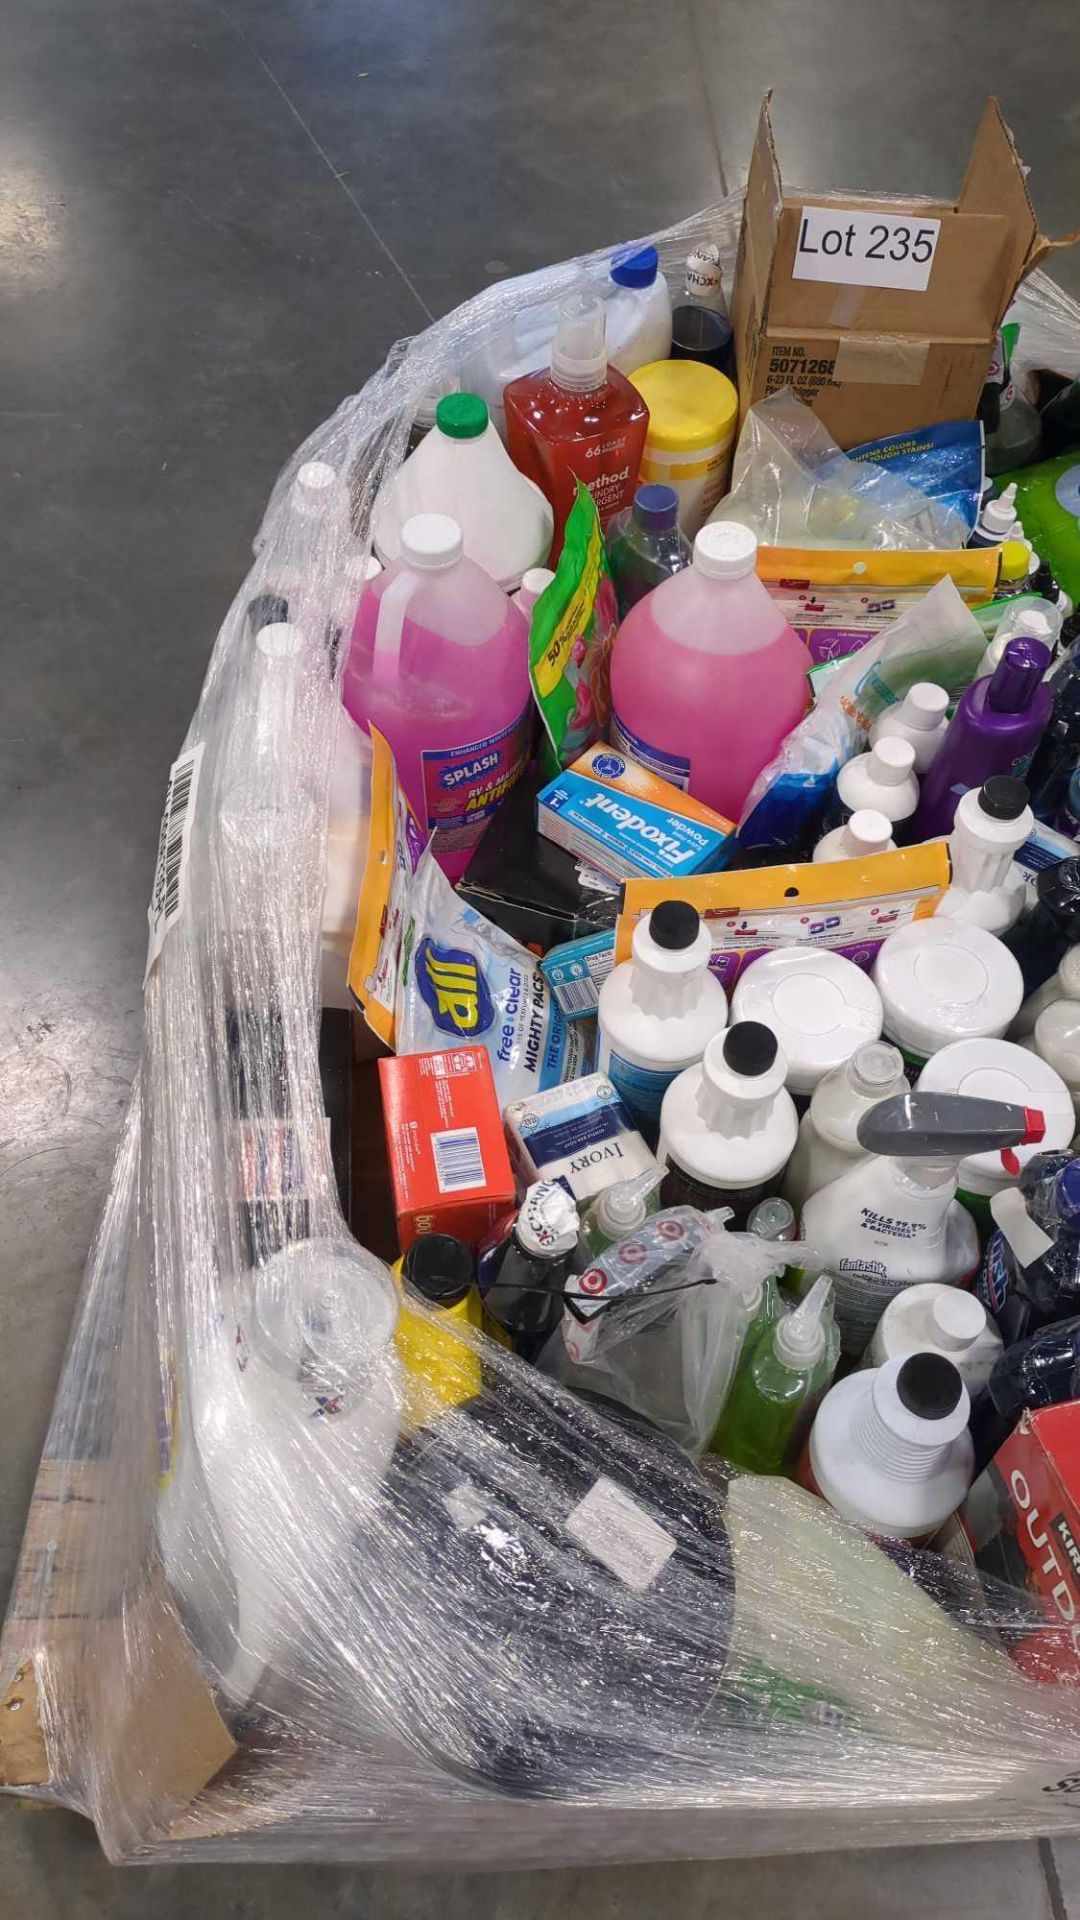 pallet of cleaning supplies, garbage bags, soaps, detergent and more - Image 3 of 4